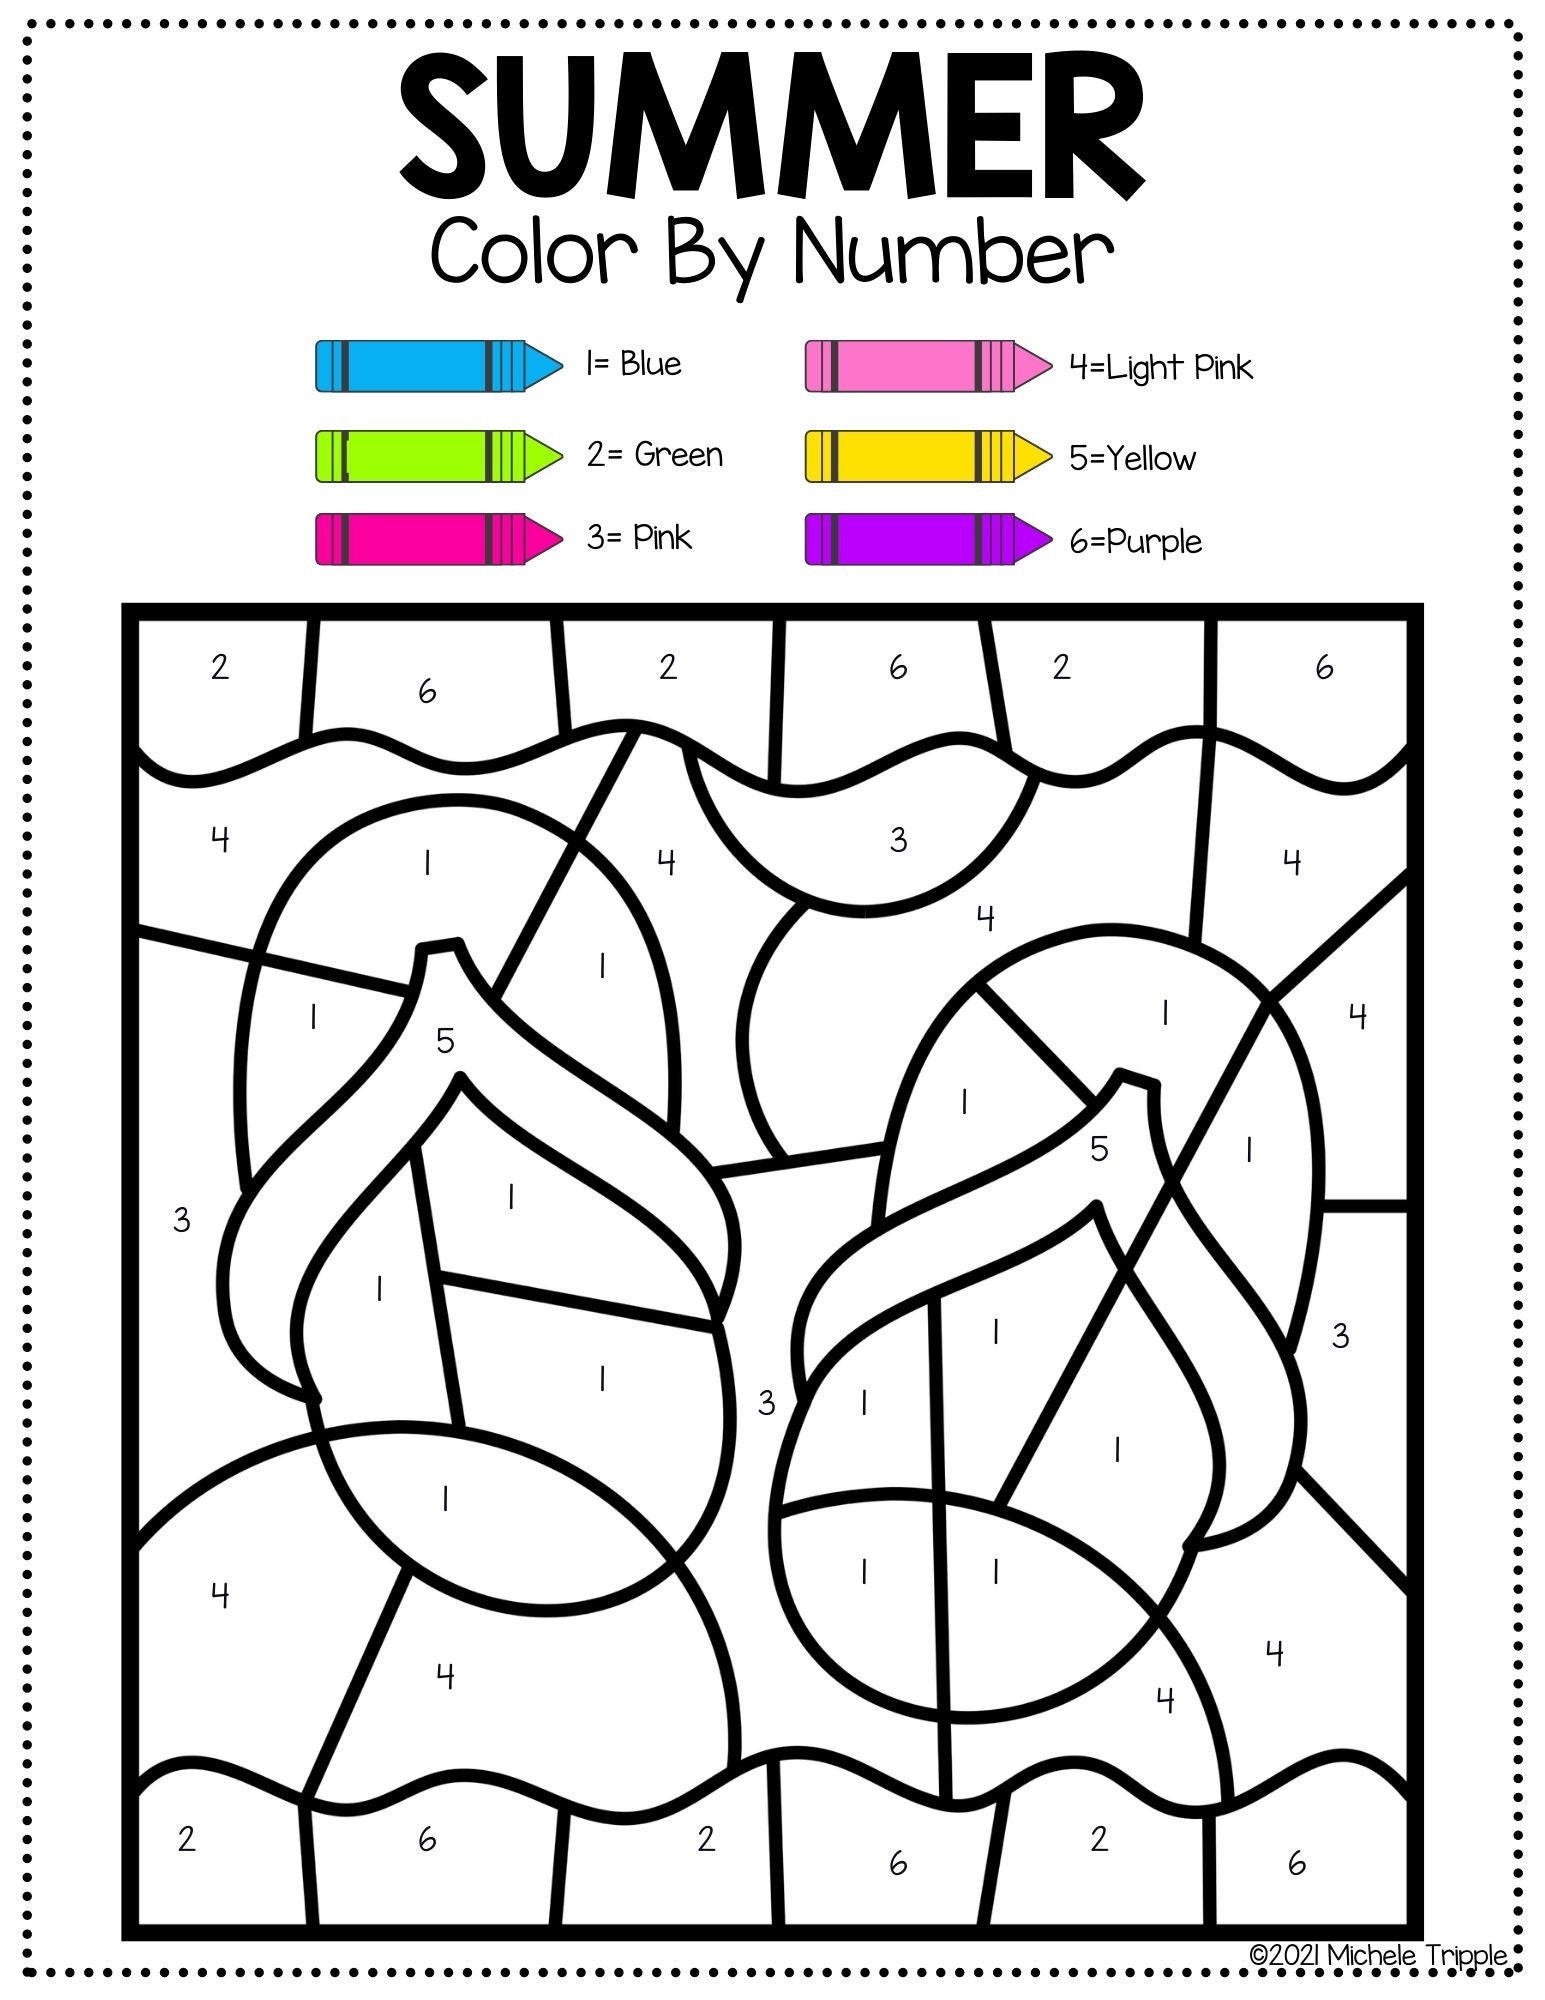 summer-color-by-number-printables